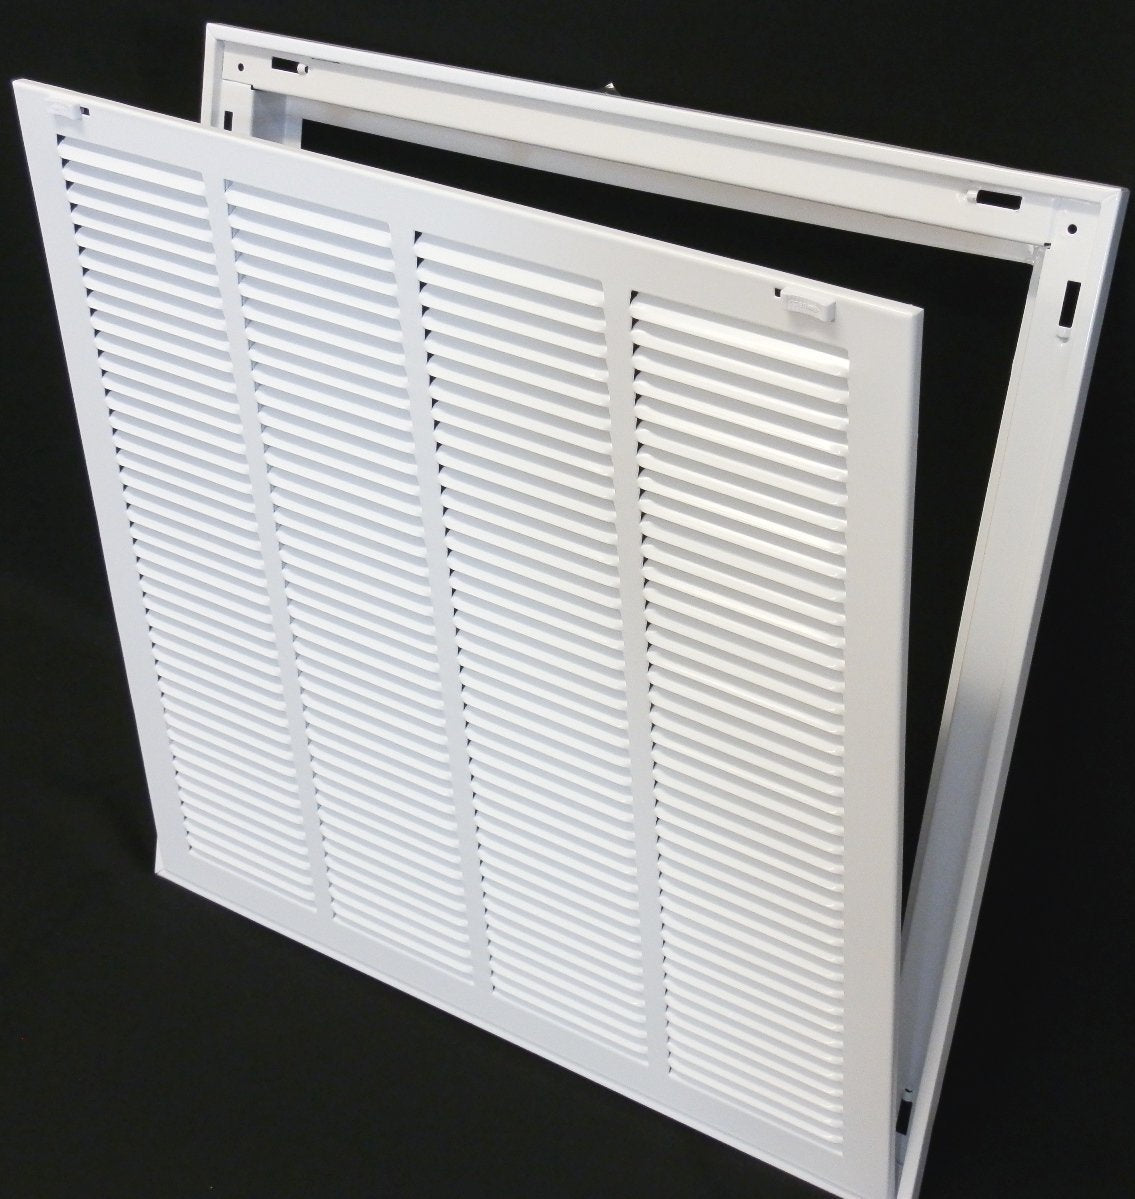 32&quot; X 14&quot; Steel Return Air Filter Grille for 1&quot; Filter - Removable Frame - [Outer Dimensions: 34 5/8&quot; X 16 5/8&quot;]